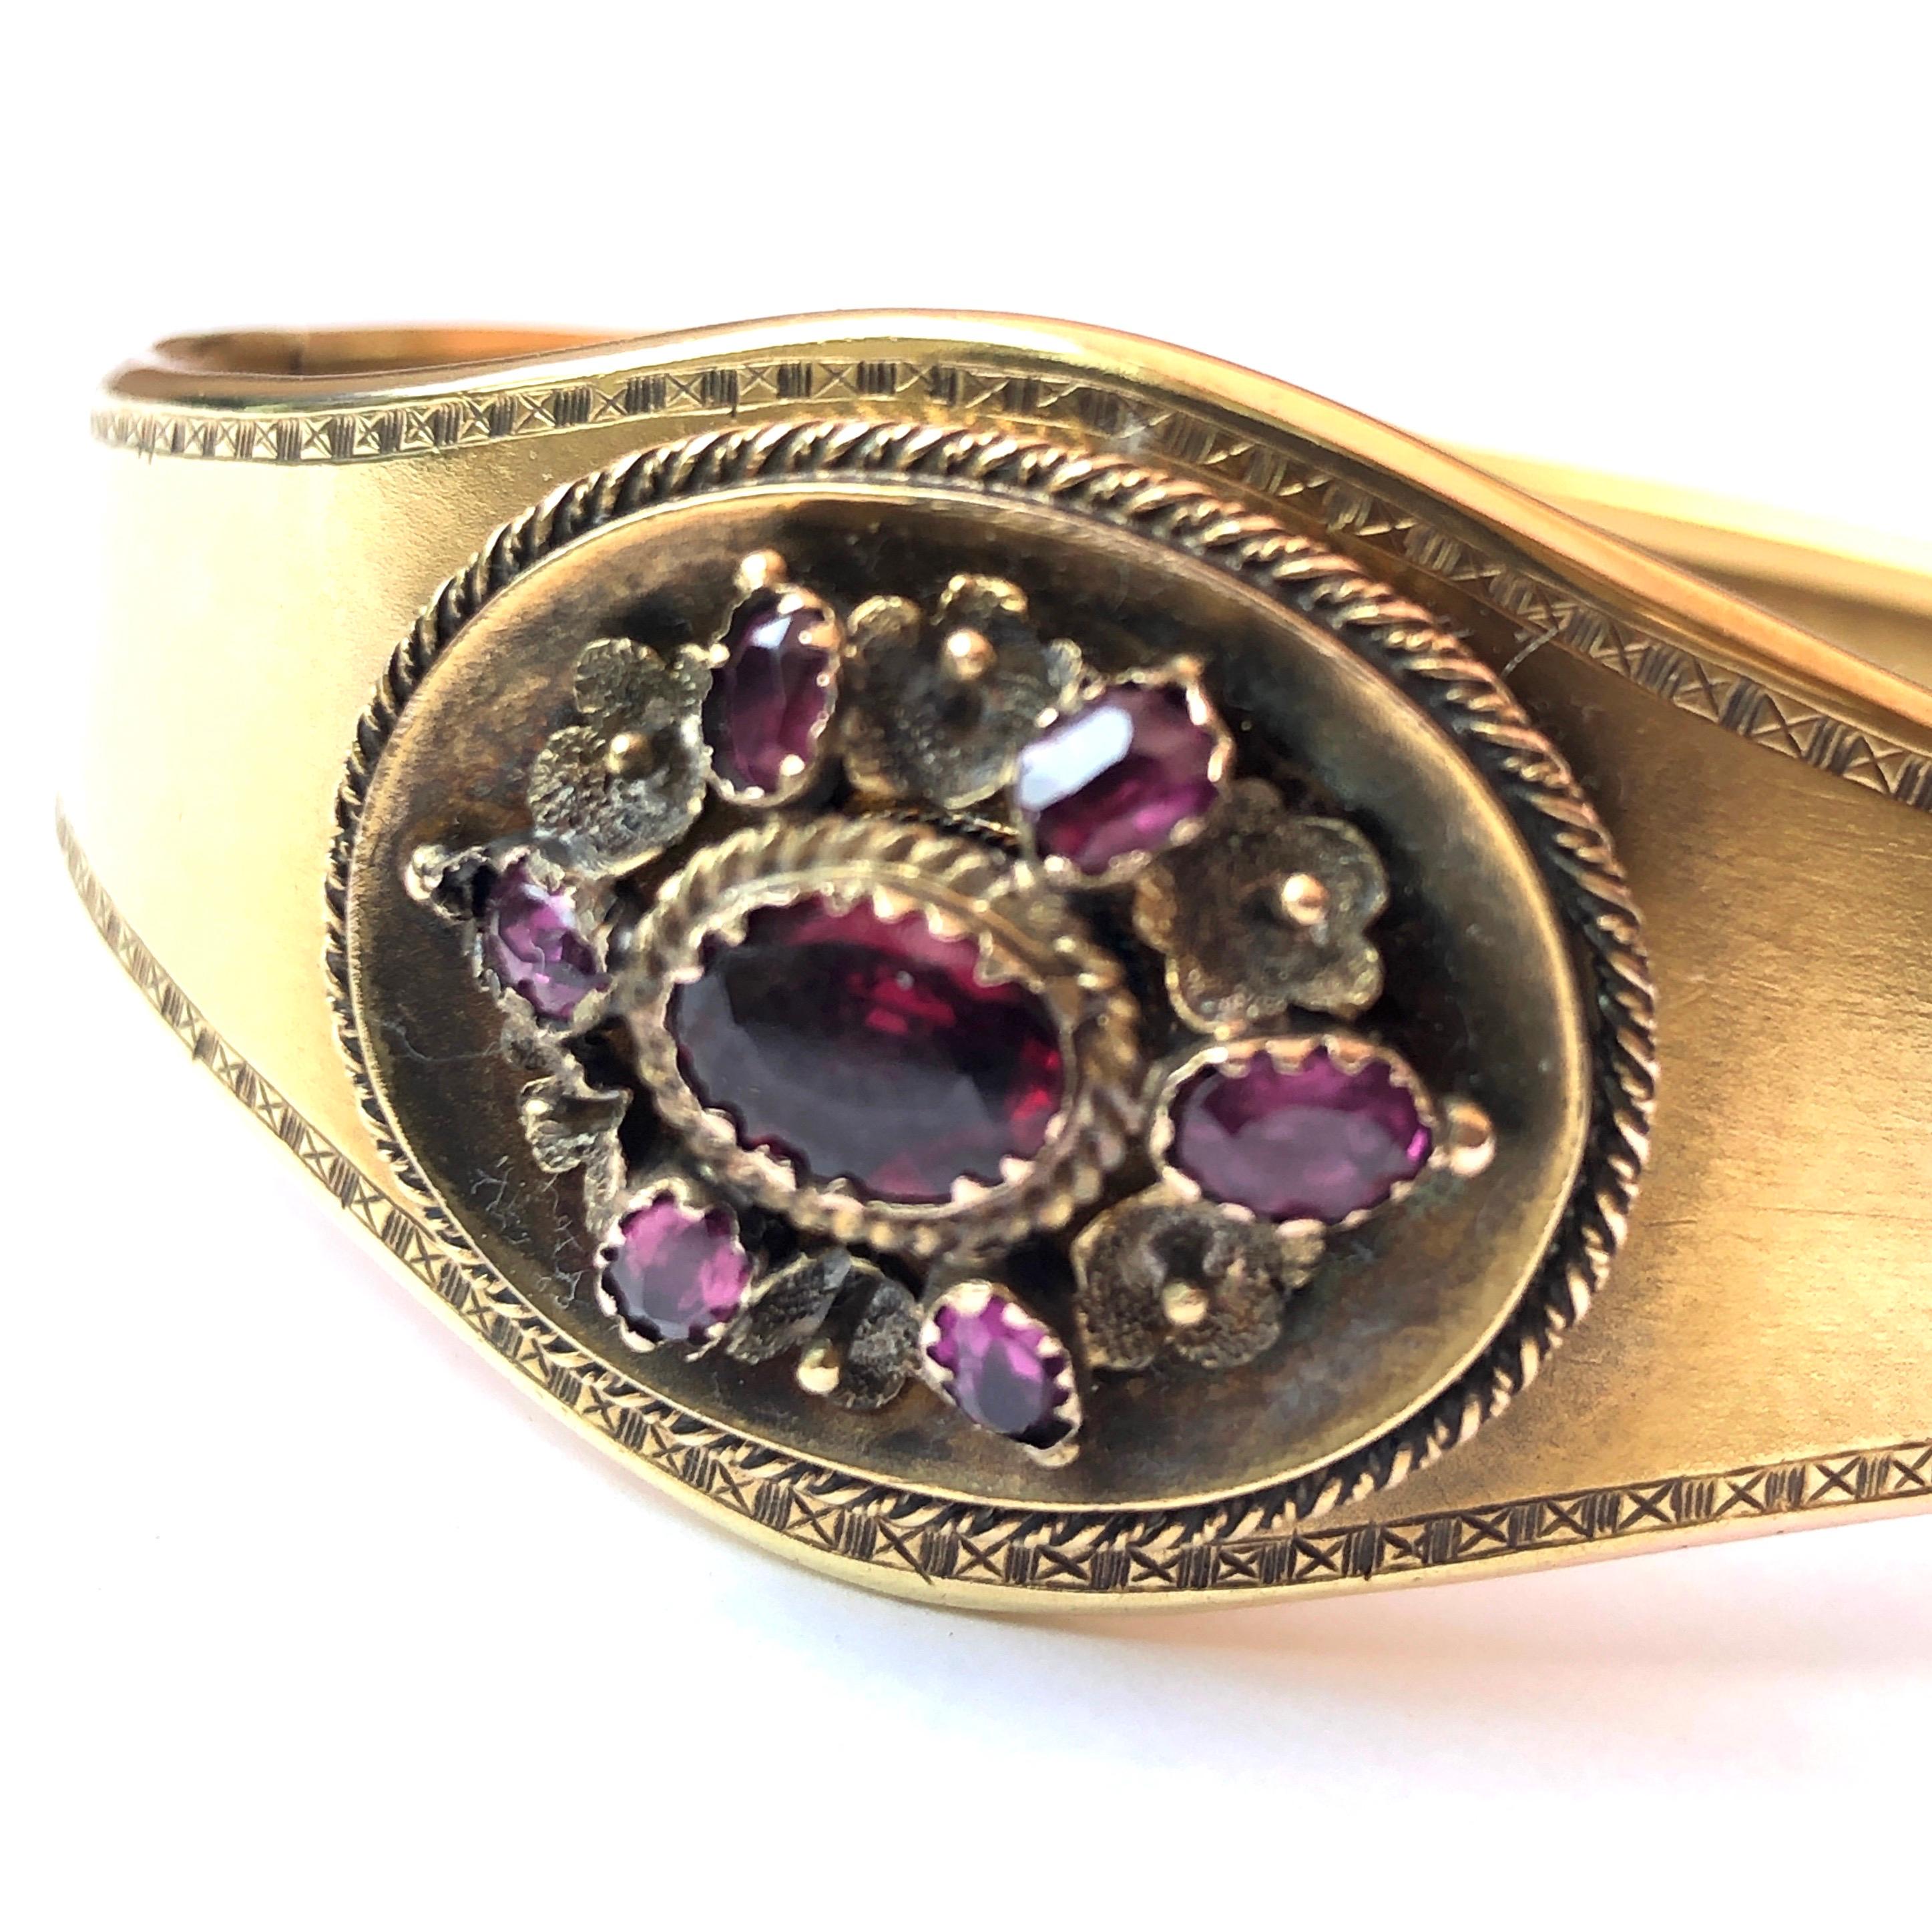 This classic style bangle holds a panel with an almandine garnet cluster and gold rope twist detail. The central stone is larger and surrounding it are six smaller stones. At the back of this panel there is a glazed locket. Modelled in 18ct gold.